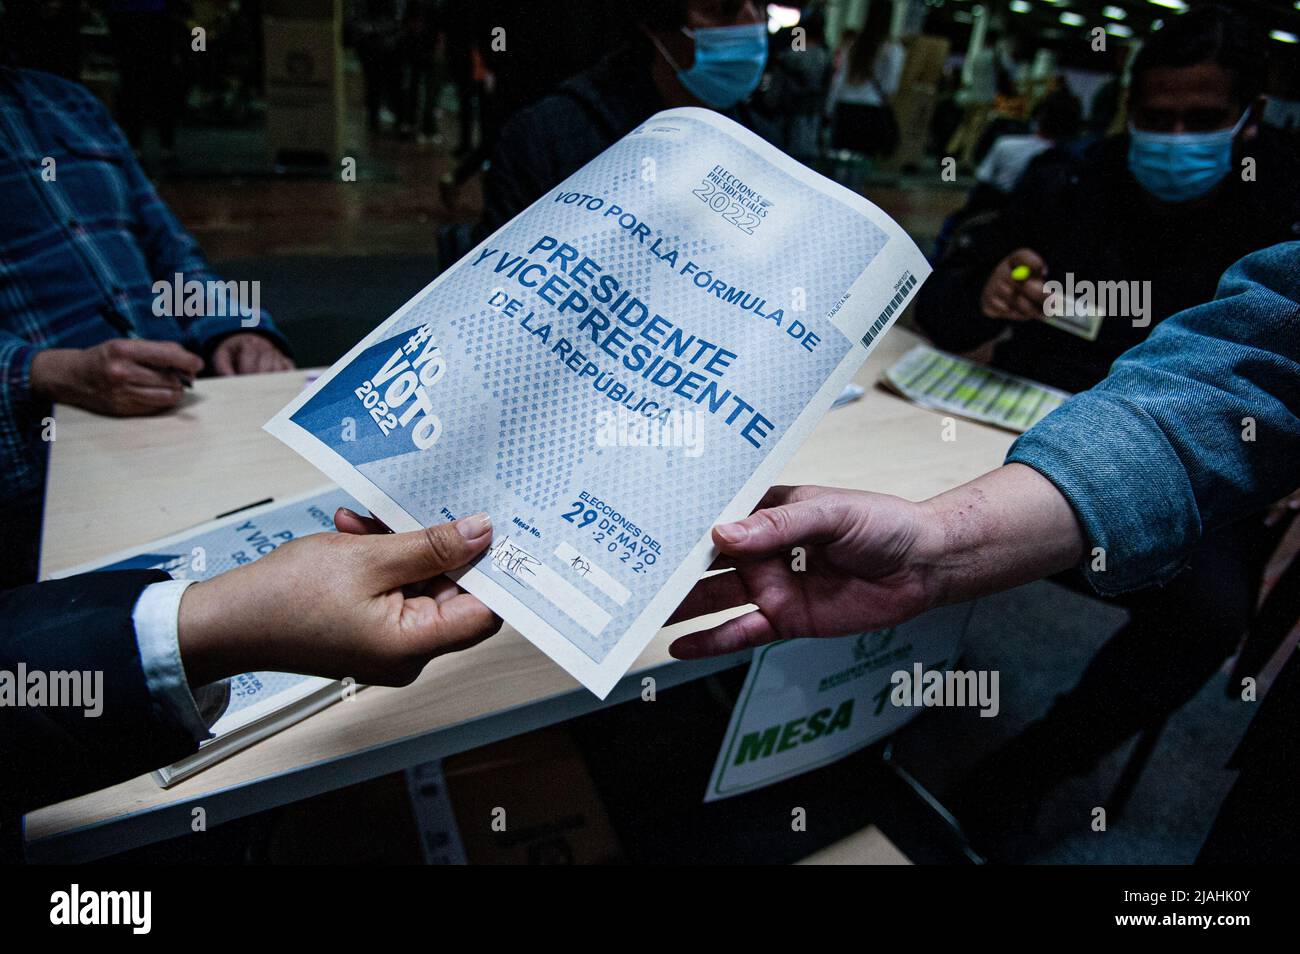 Electoral jury hands the presidential election ballots to voters during the 2022 Presidential elections in Bogota, Colombia on May 29, 2022. Stock Photo